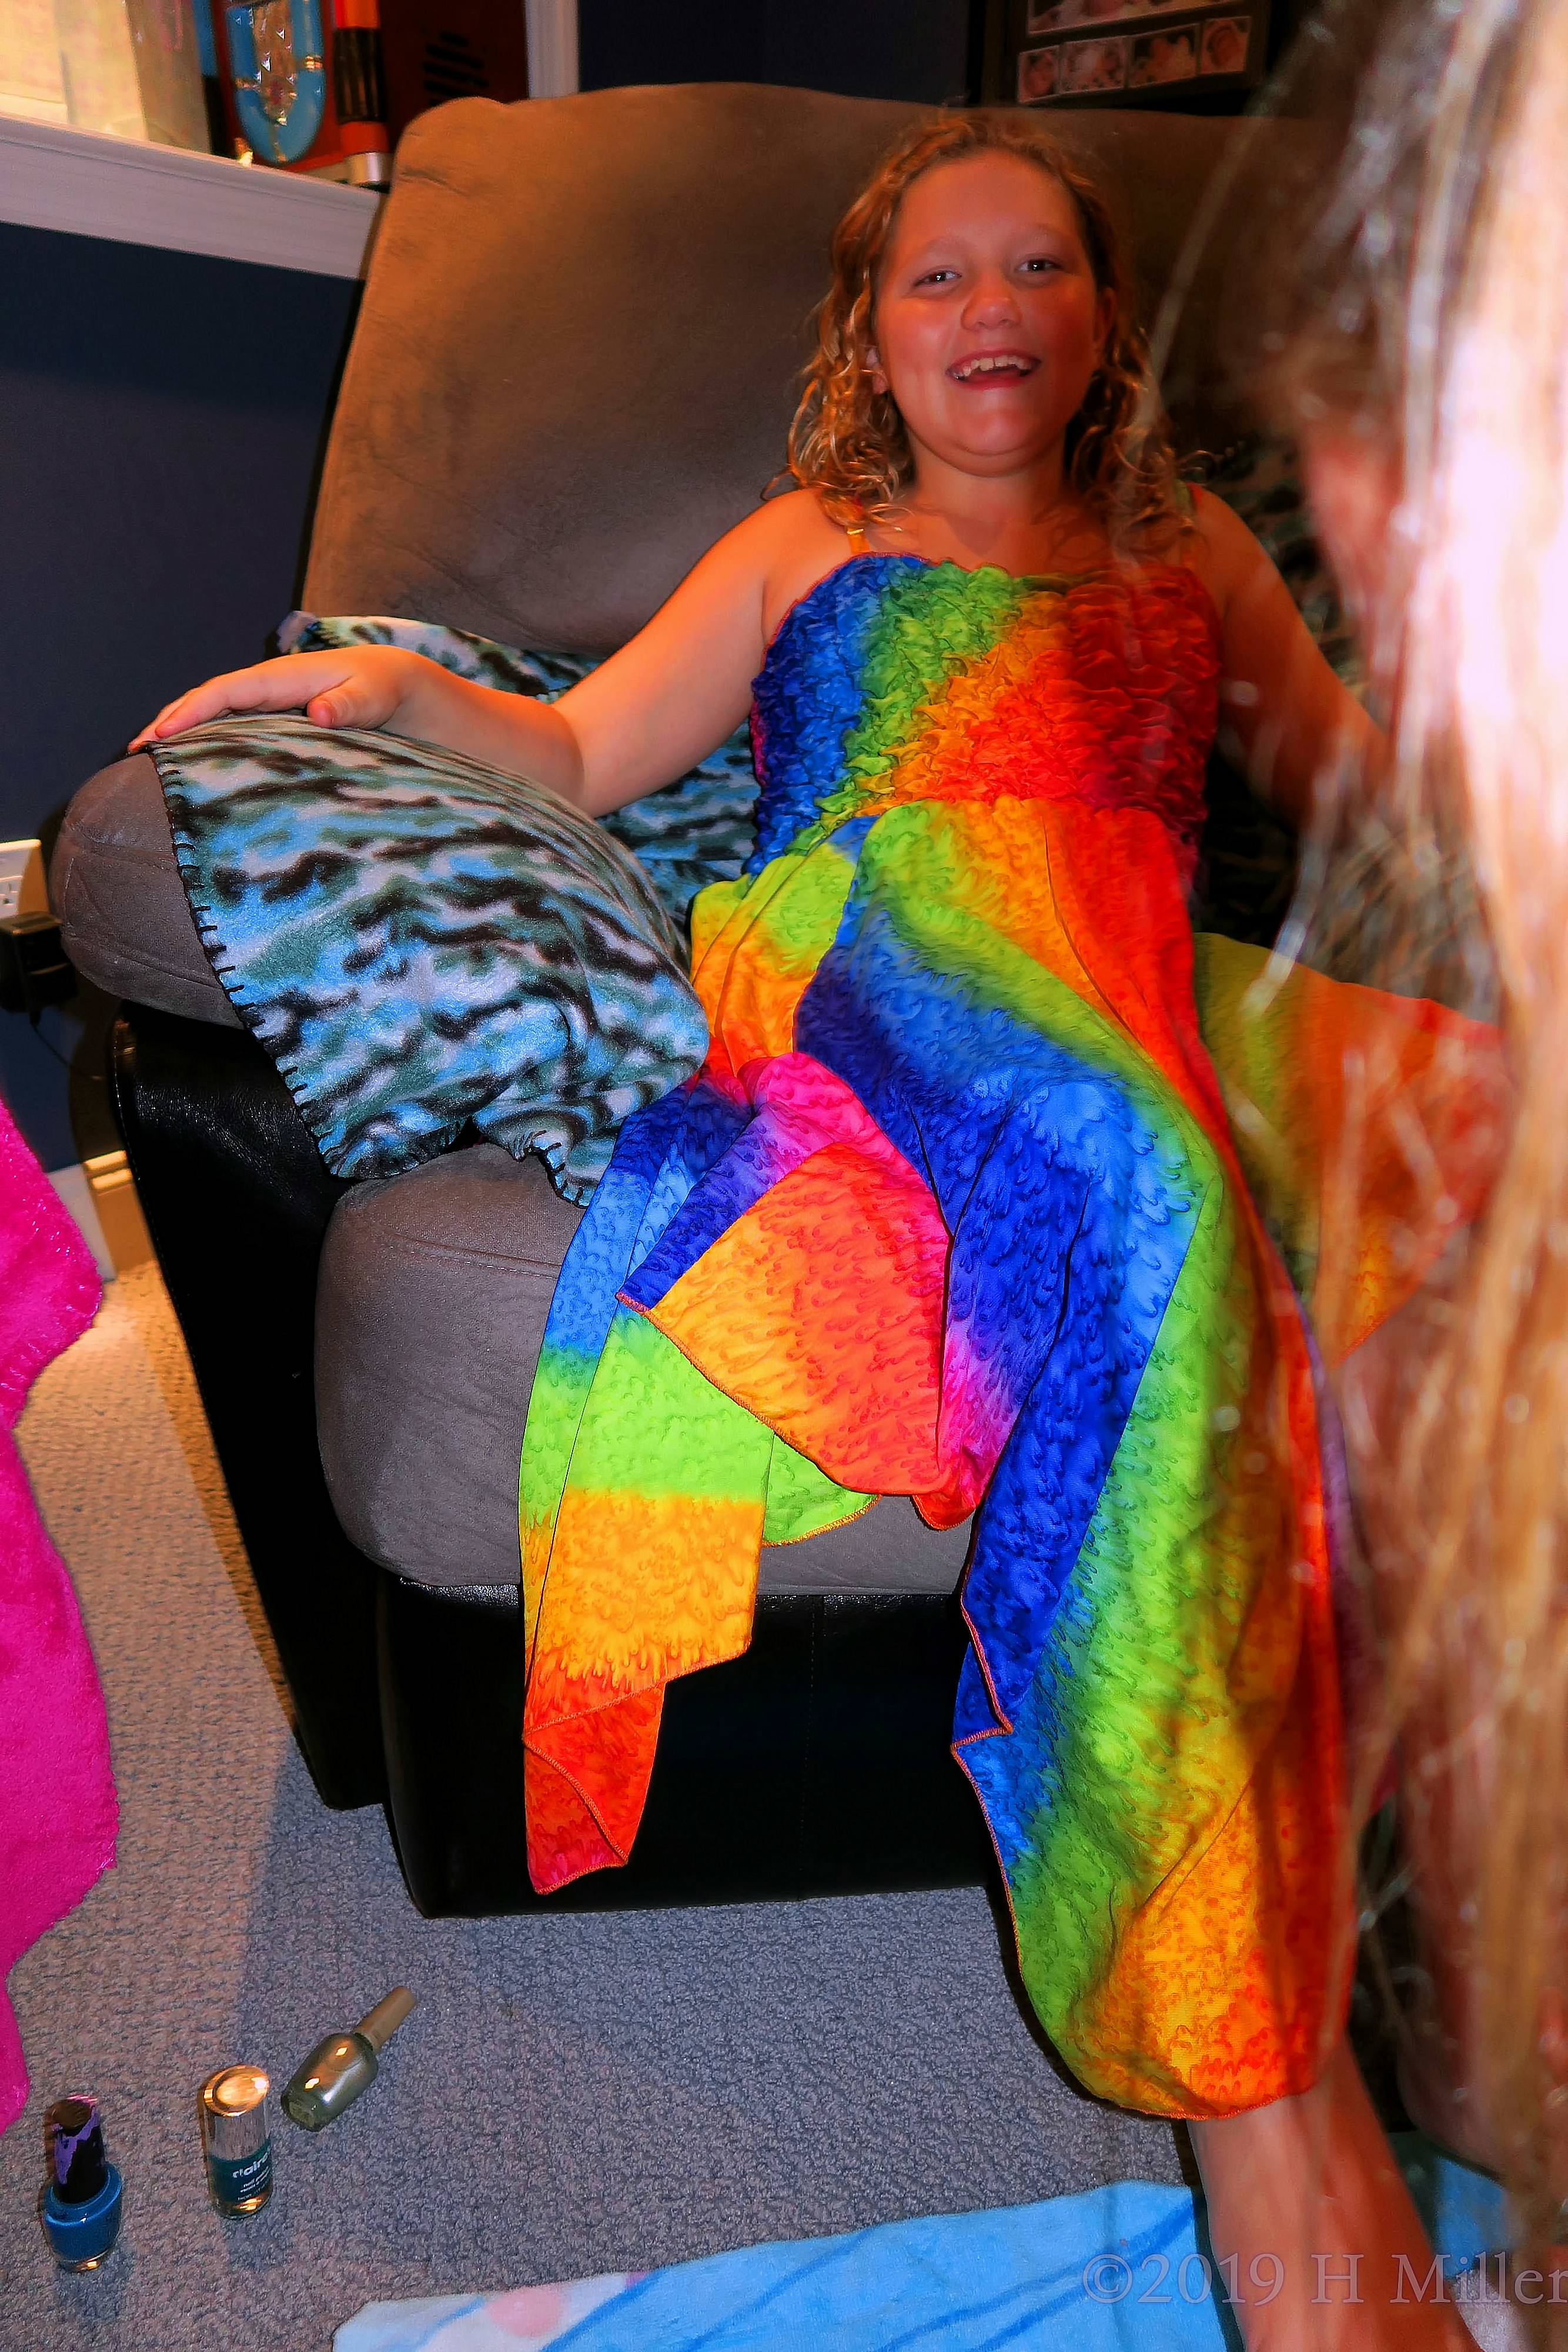 Colorful And Chilling! Spa Party Guest Poses On The Couch At The Party! 